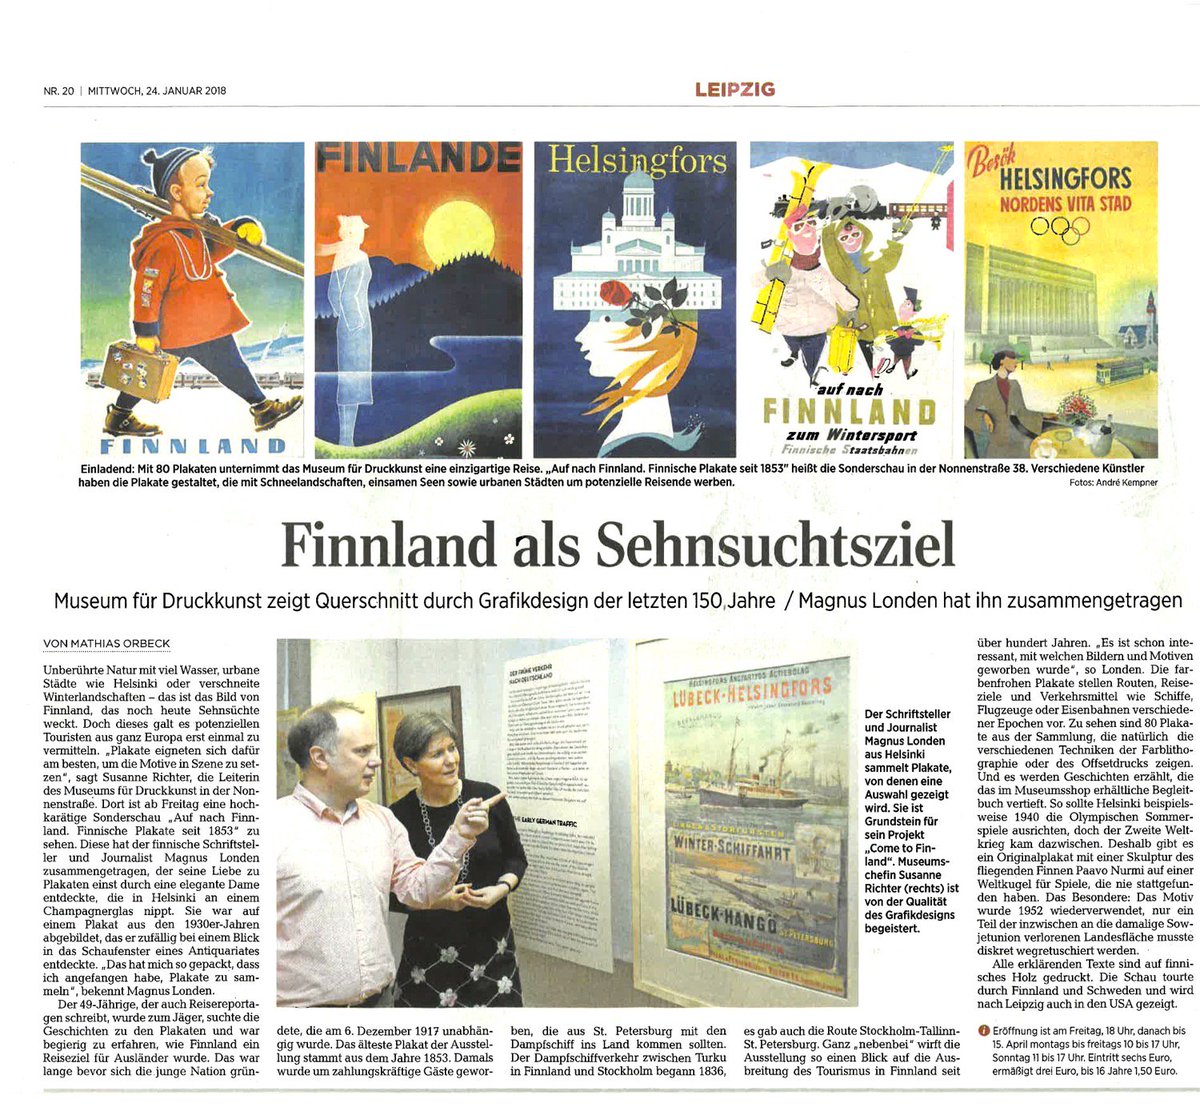 Our Finnish vintage travel poster exhibition has now reached #Leipzig and is already in the news! Poster glory to all! Opening Friday.